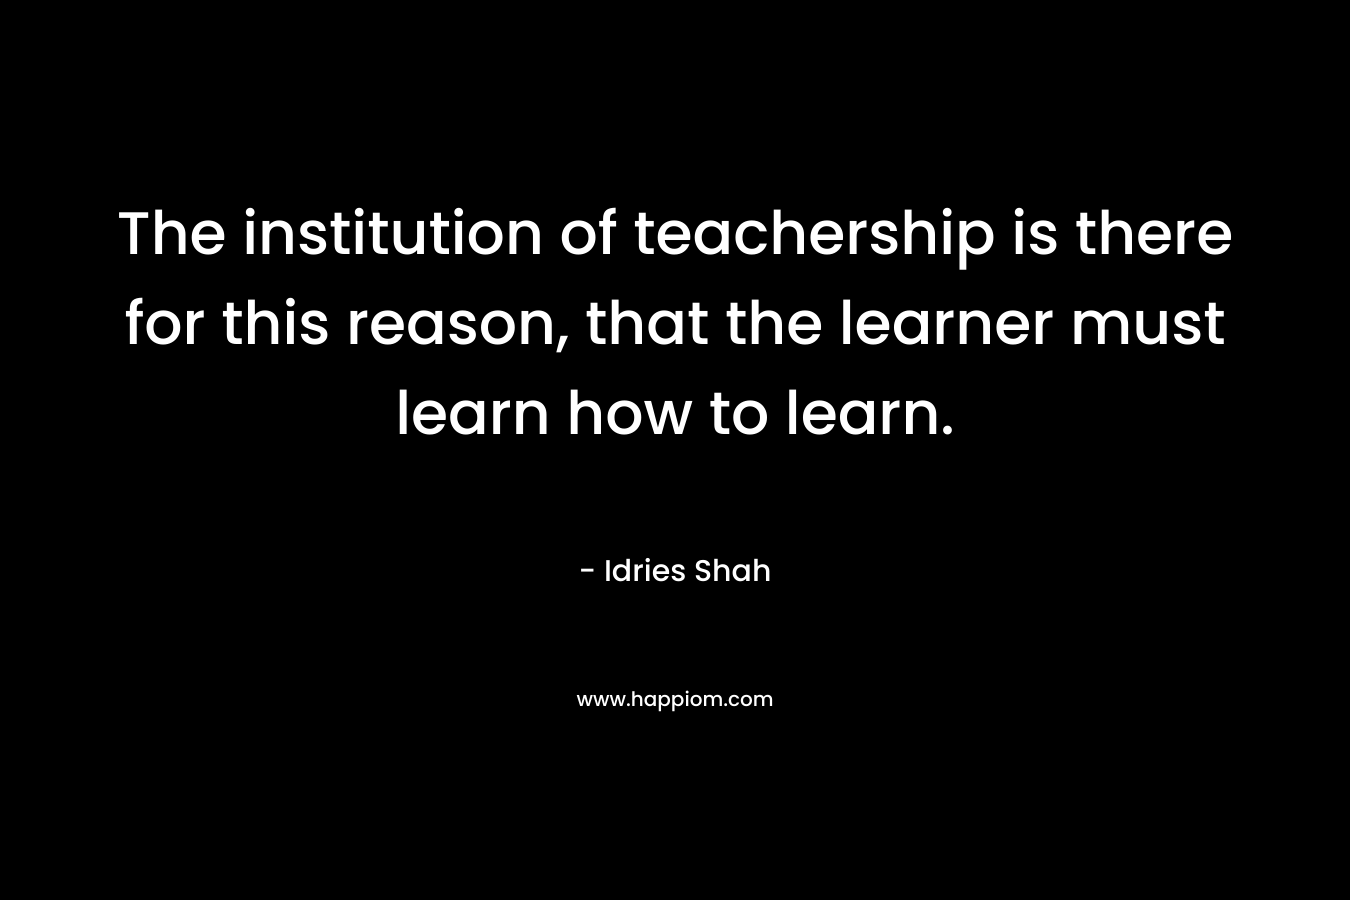 The institution of teachership is there for this reason, that the learner must learn how to learn.